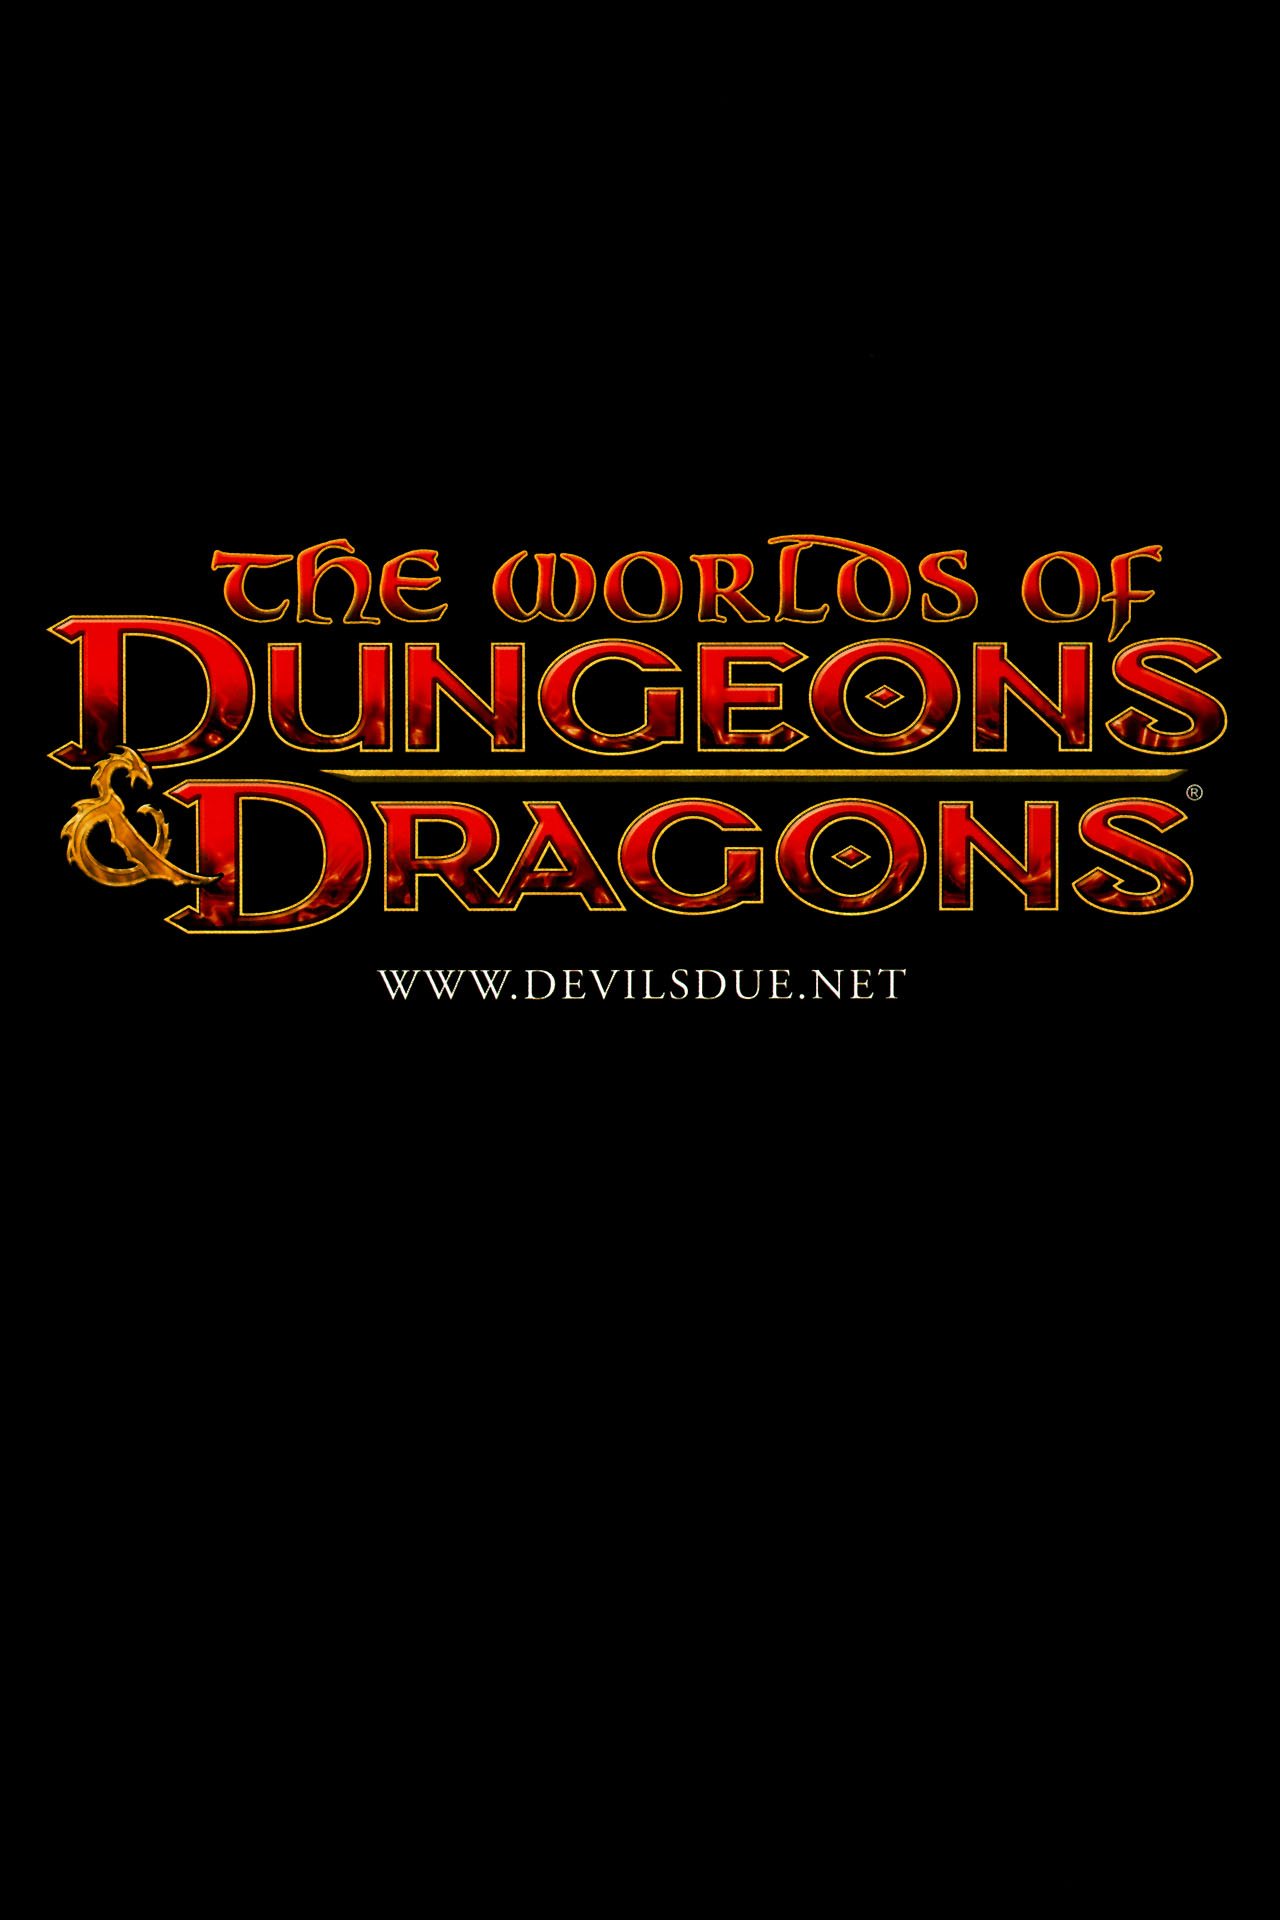 Read online The Worlds of Dungeons & Dragons comic -  Issue #7 - 51